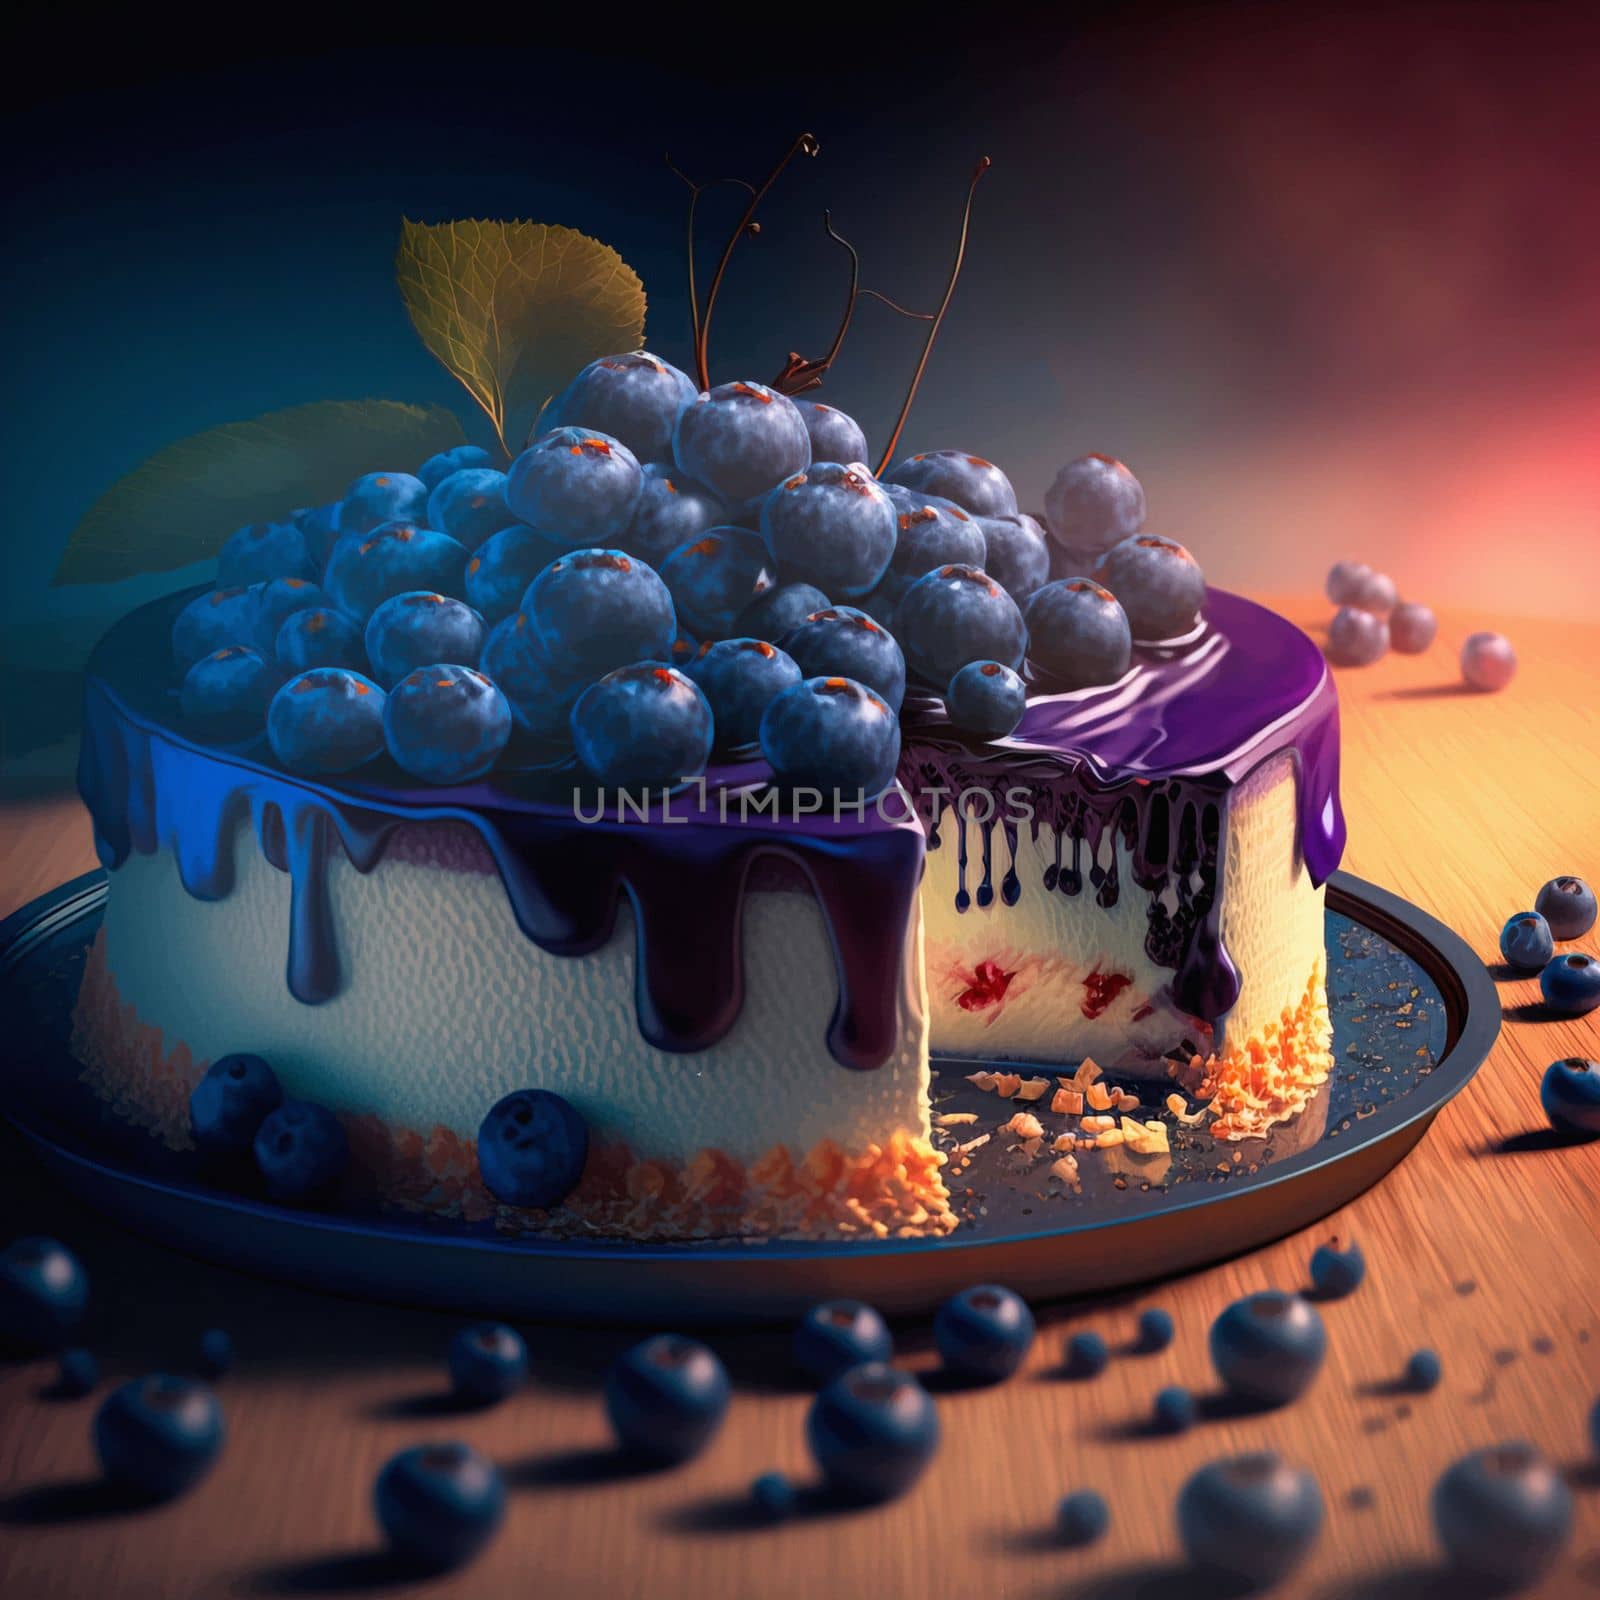 A slice of delicious blueberry cheesecake with fresh blueberries by igor010